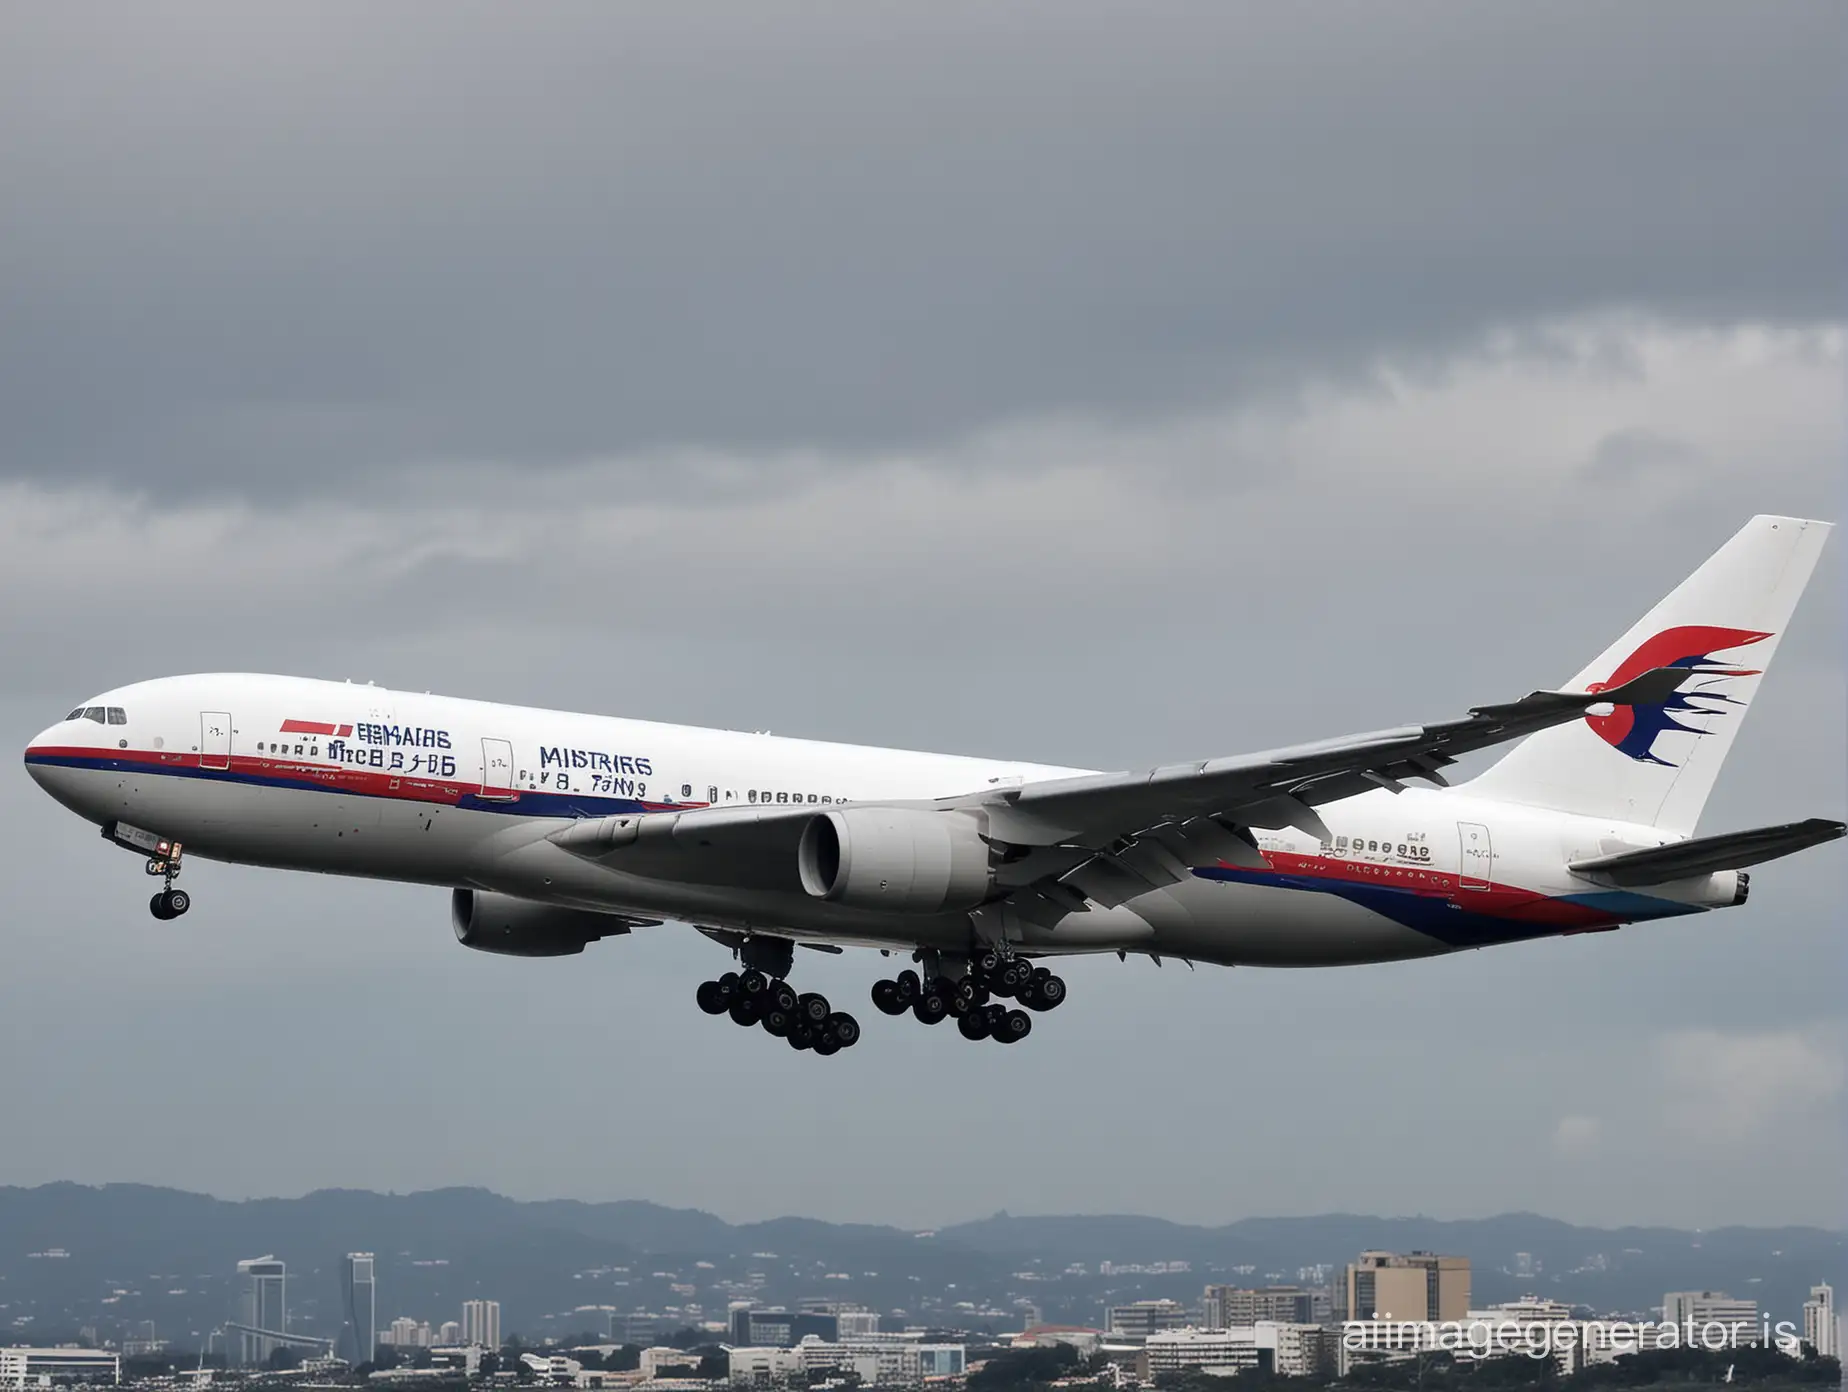 Mysterious-Disappearance-of-Malaysia-Airlines-Flight-MH370